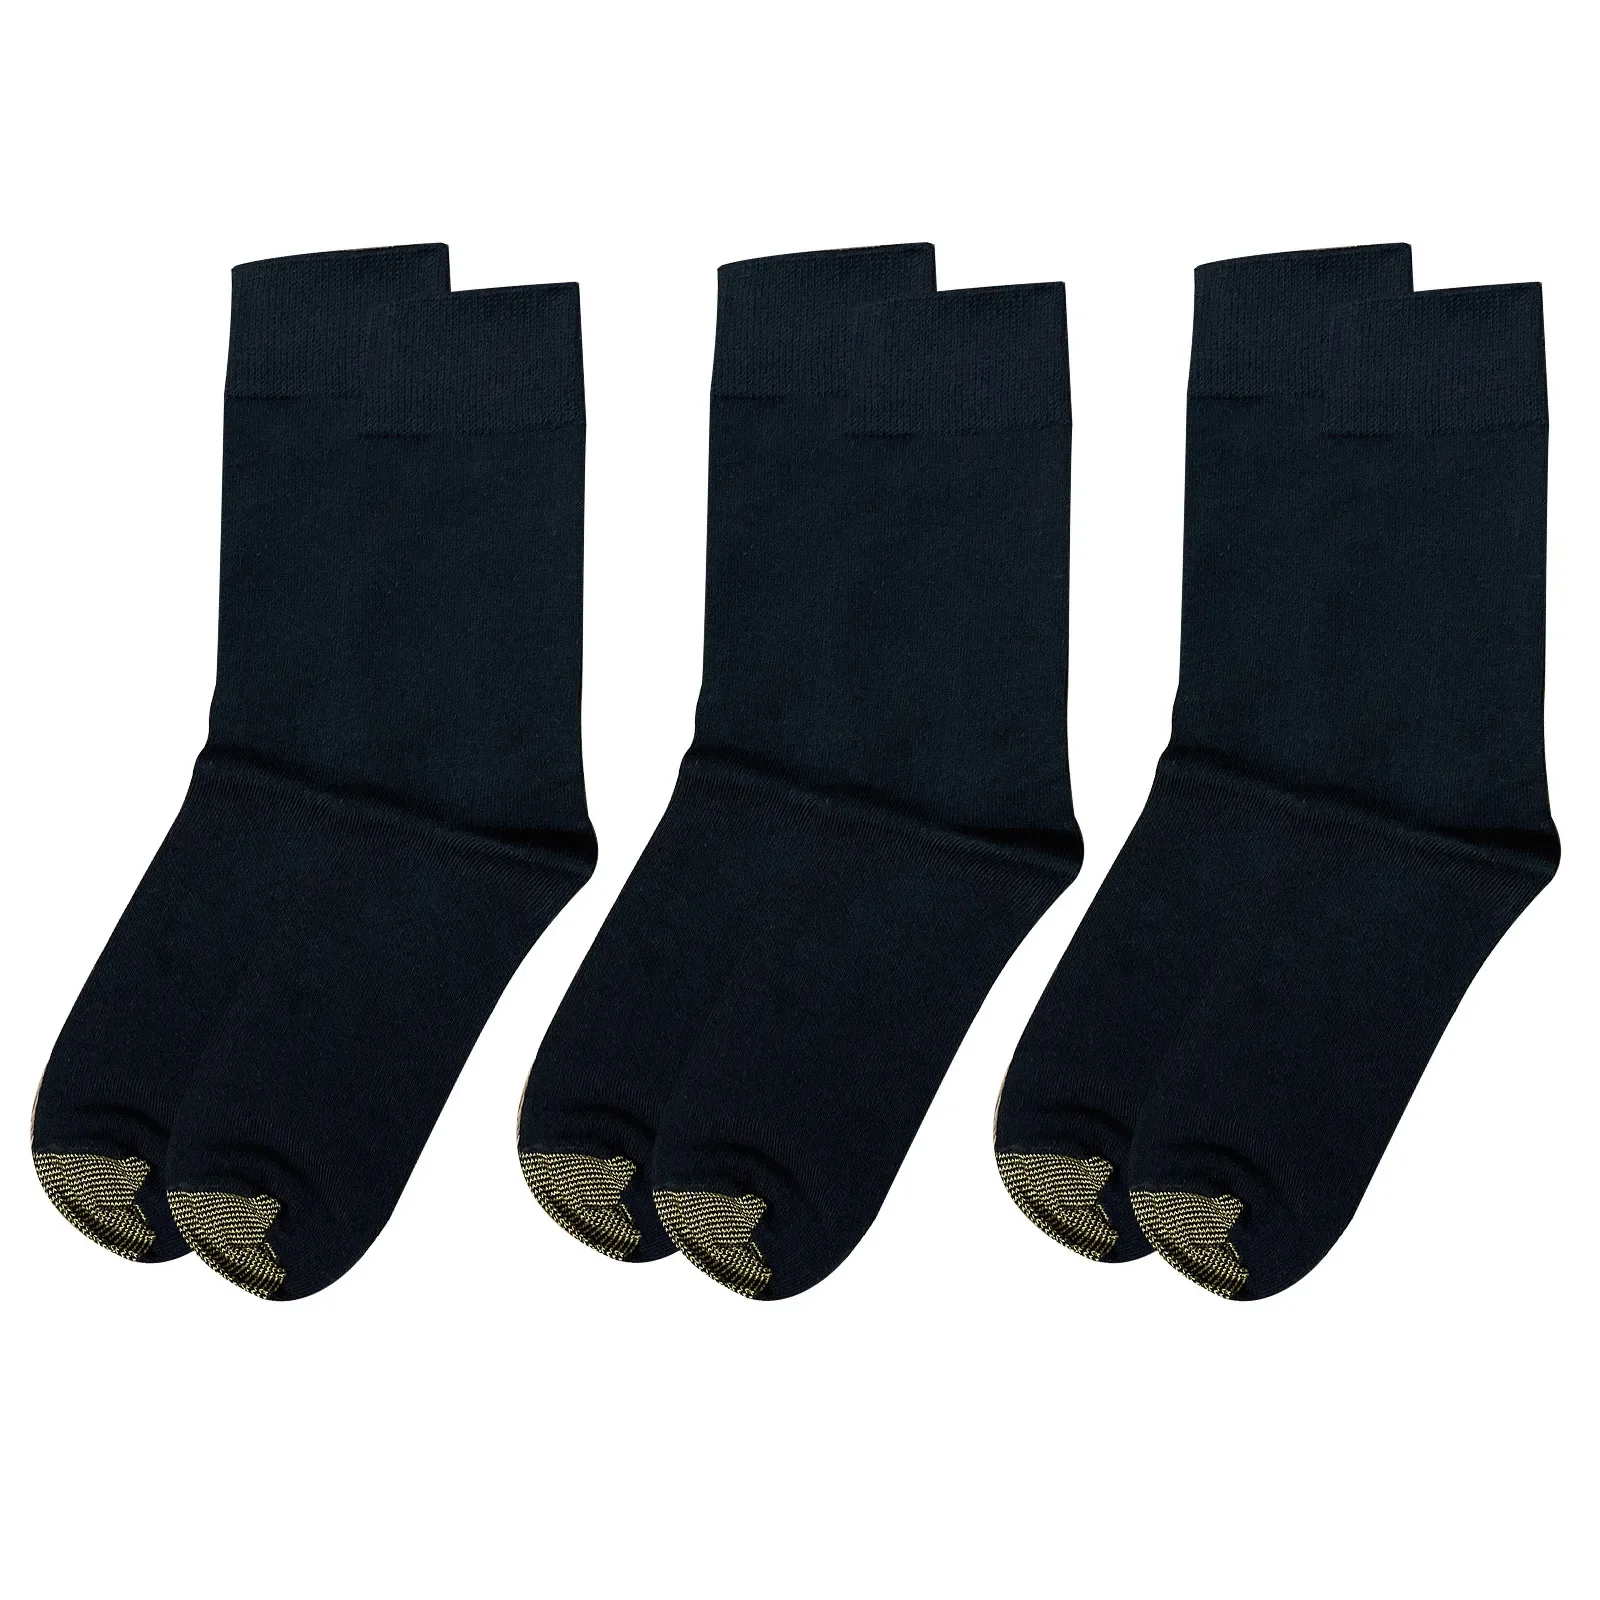 CLEVER-MENMODE 3 x Cotton Socks Men Formal Tube Sock Business Male hombre Sports Casual Soft Fashion Comfortable